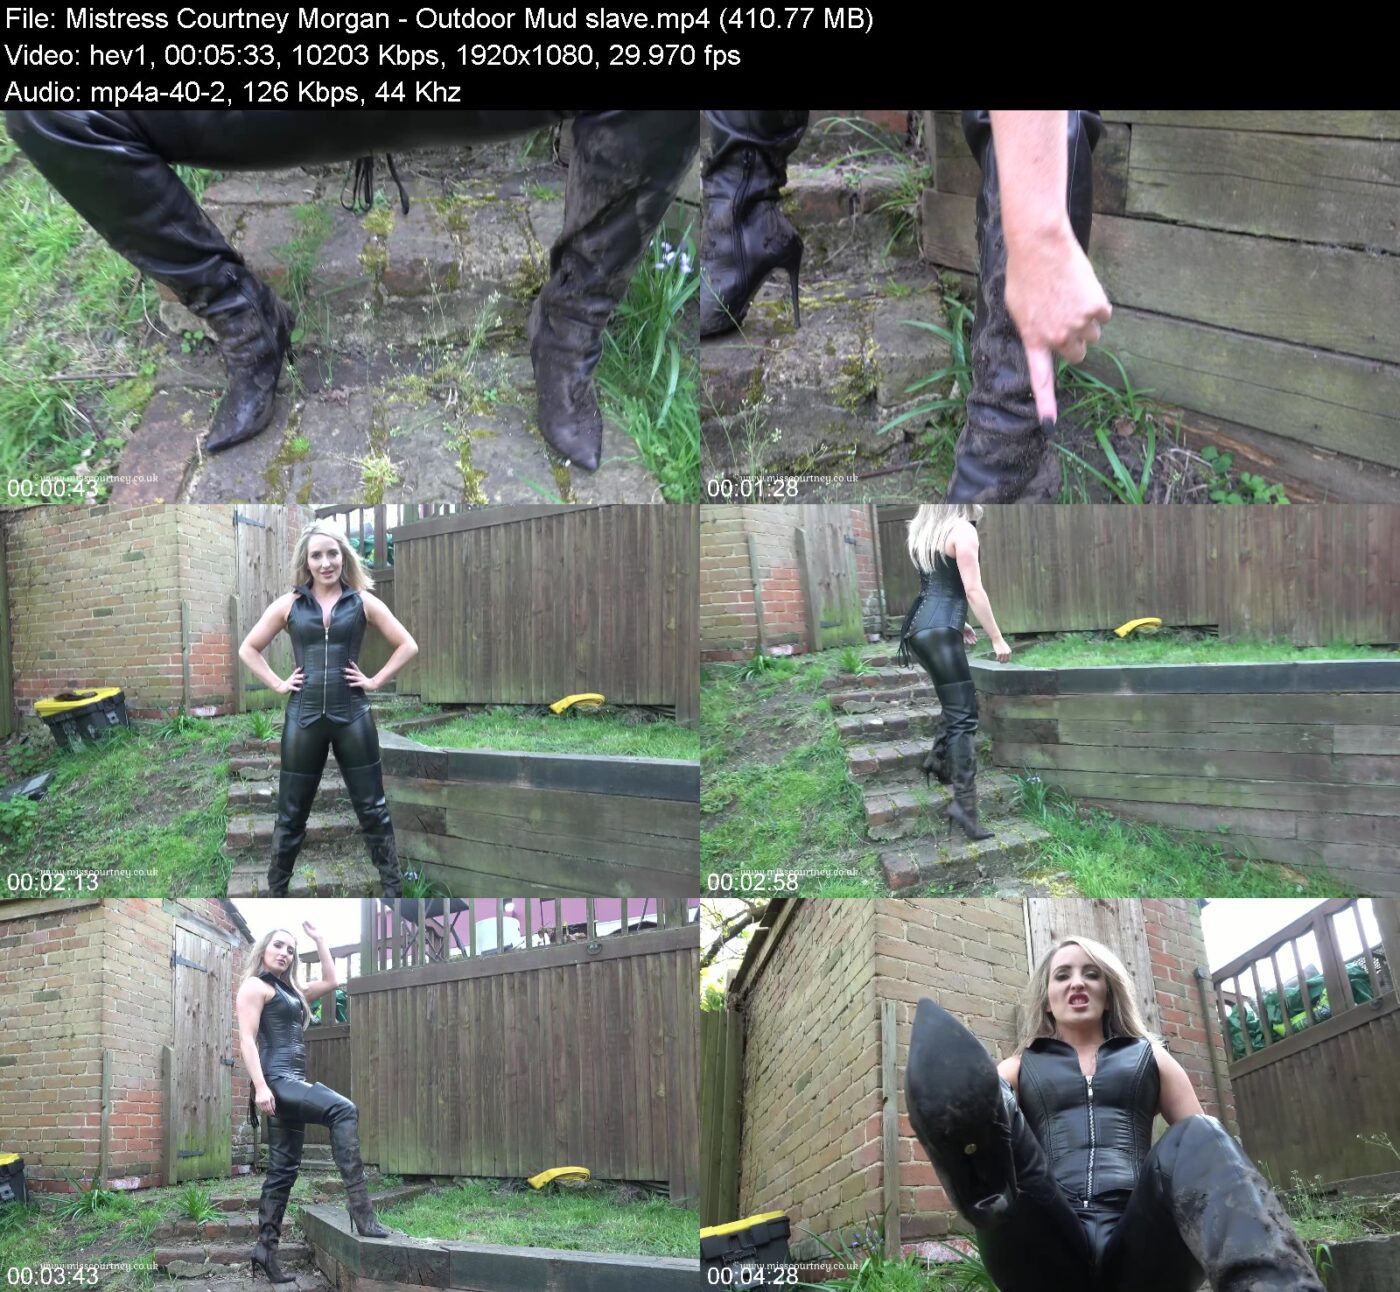 Actress: Mistress Courtney Morgan. Title and Studio: Outdoor Mud slave